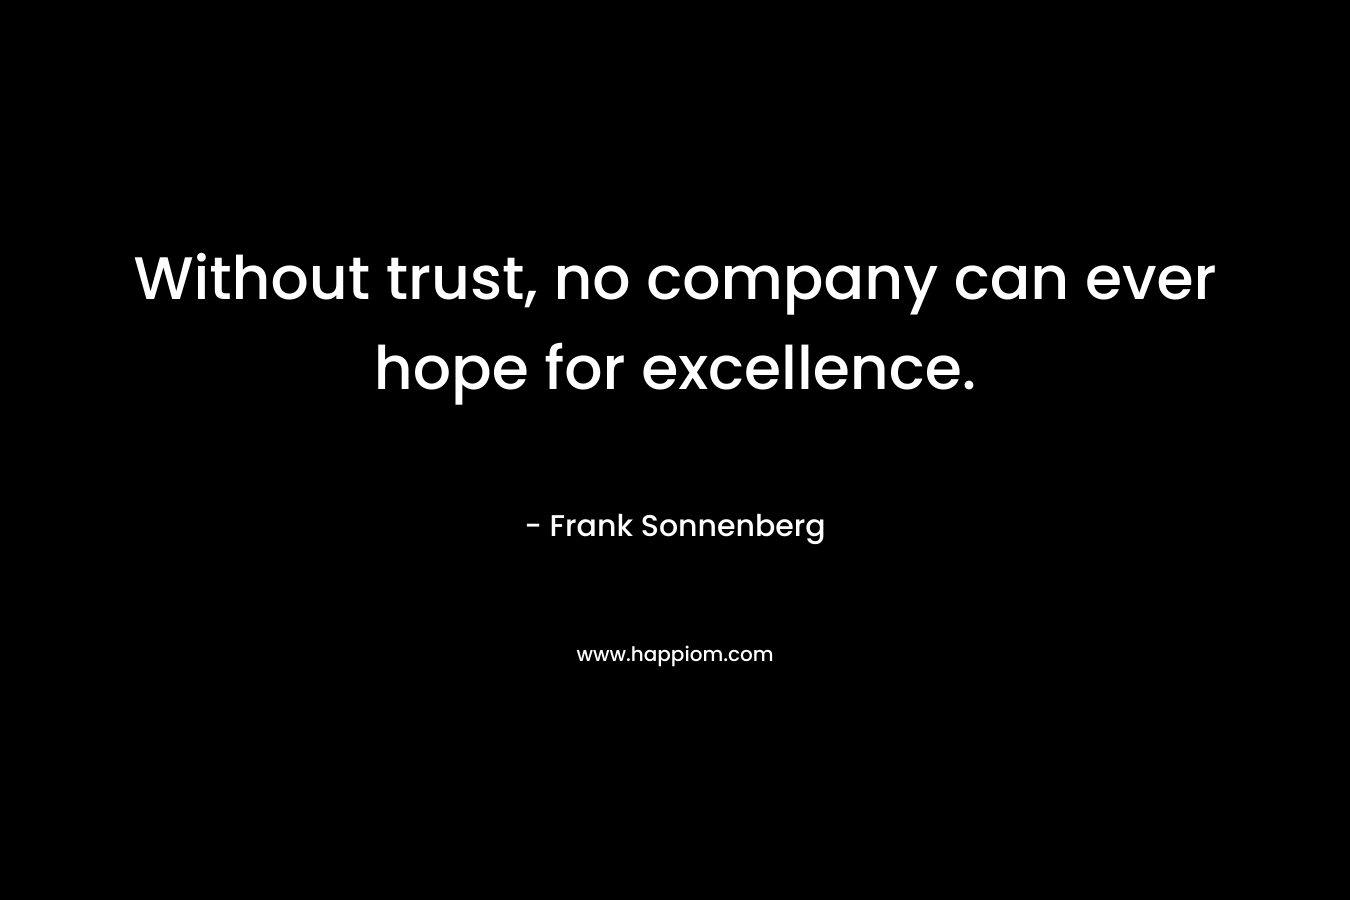 Without trust, no company can ever hope for excellence.